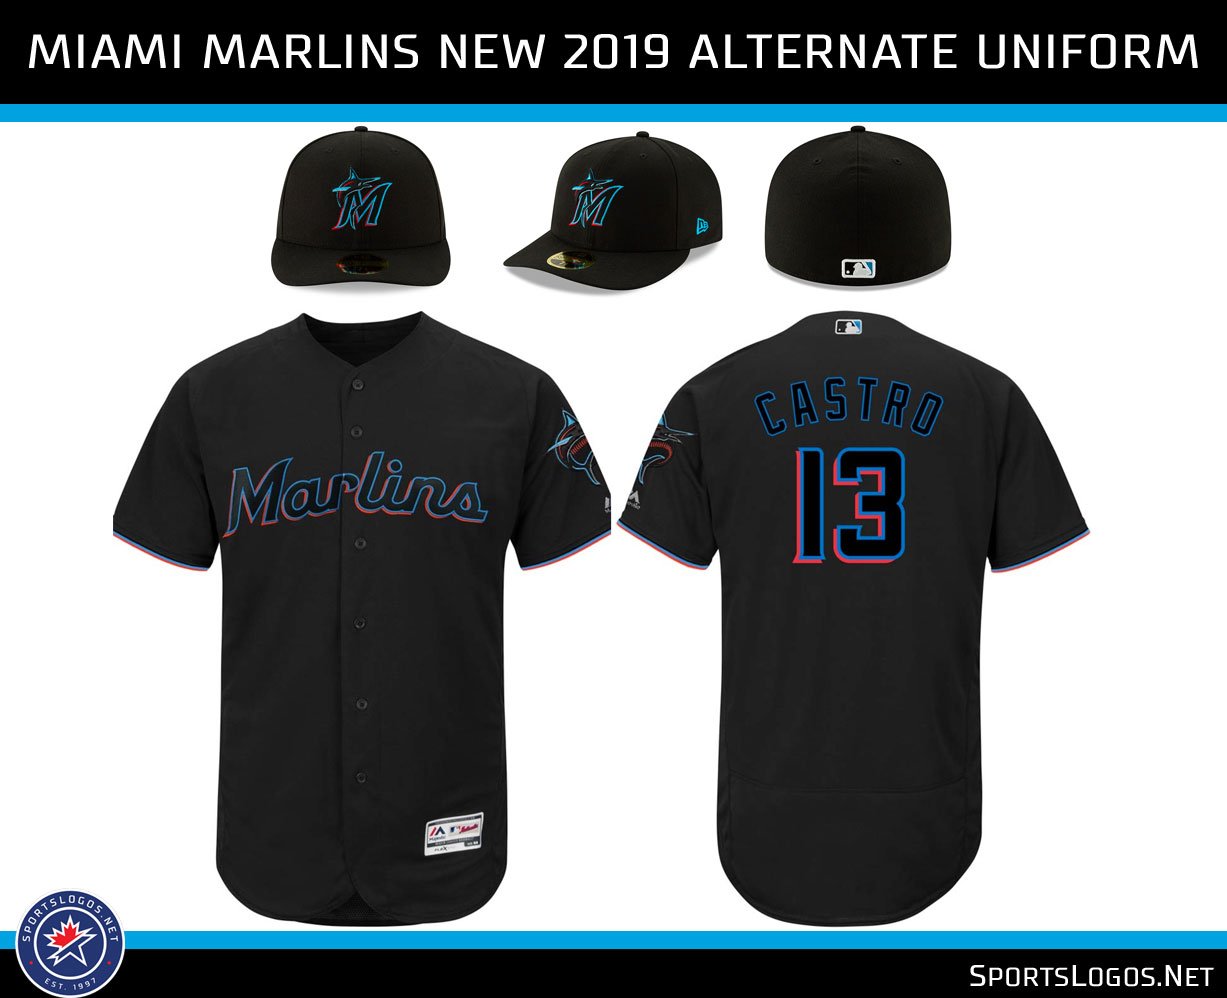 Potential New Miami Marlins Uniforms Leaked, Feature Colorful